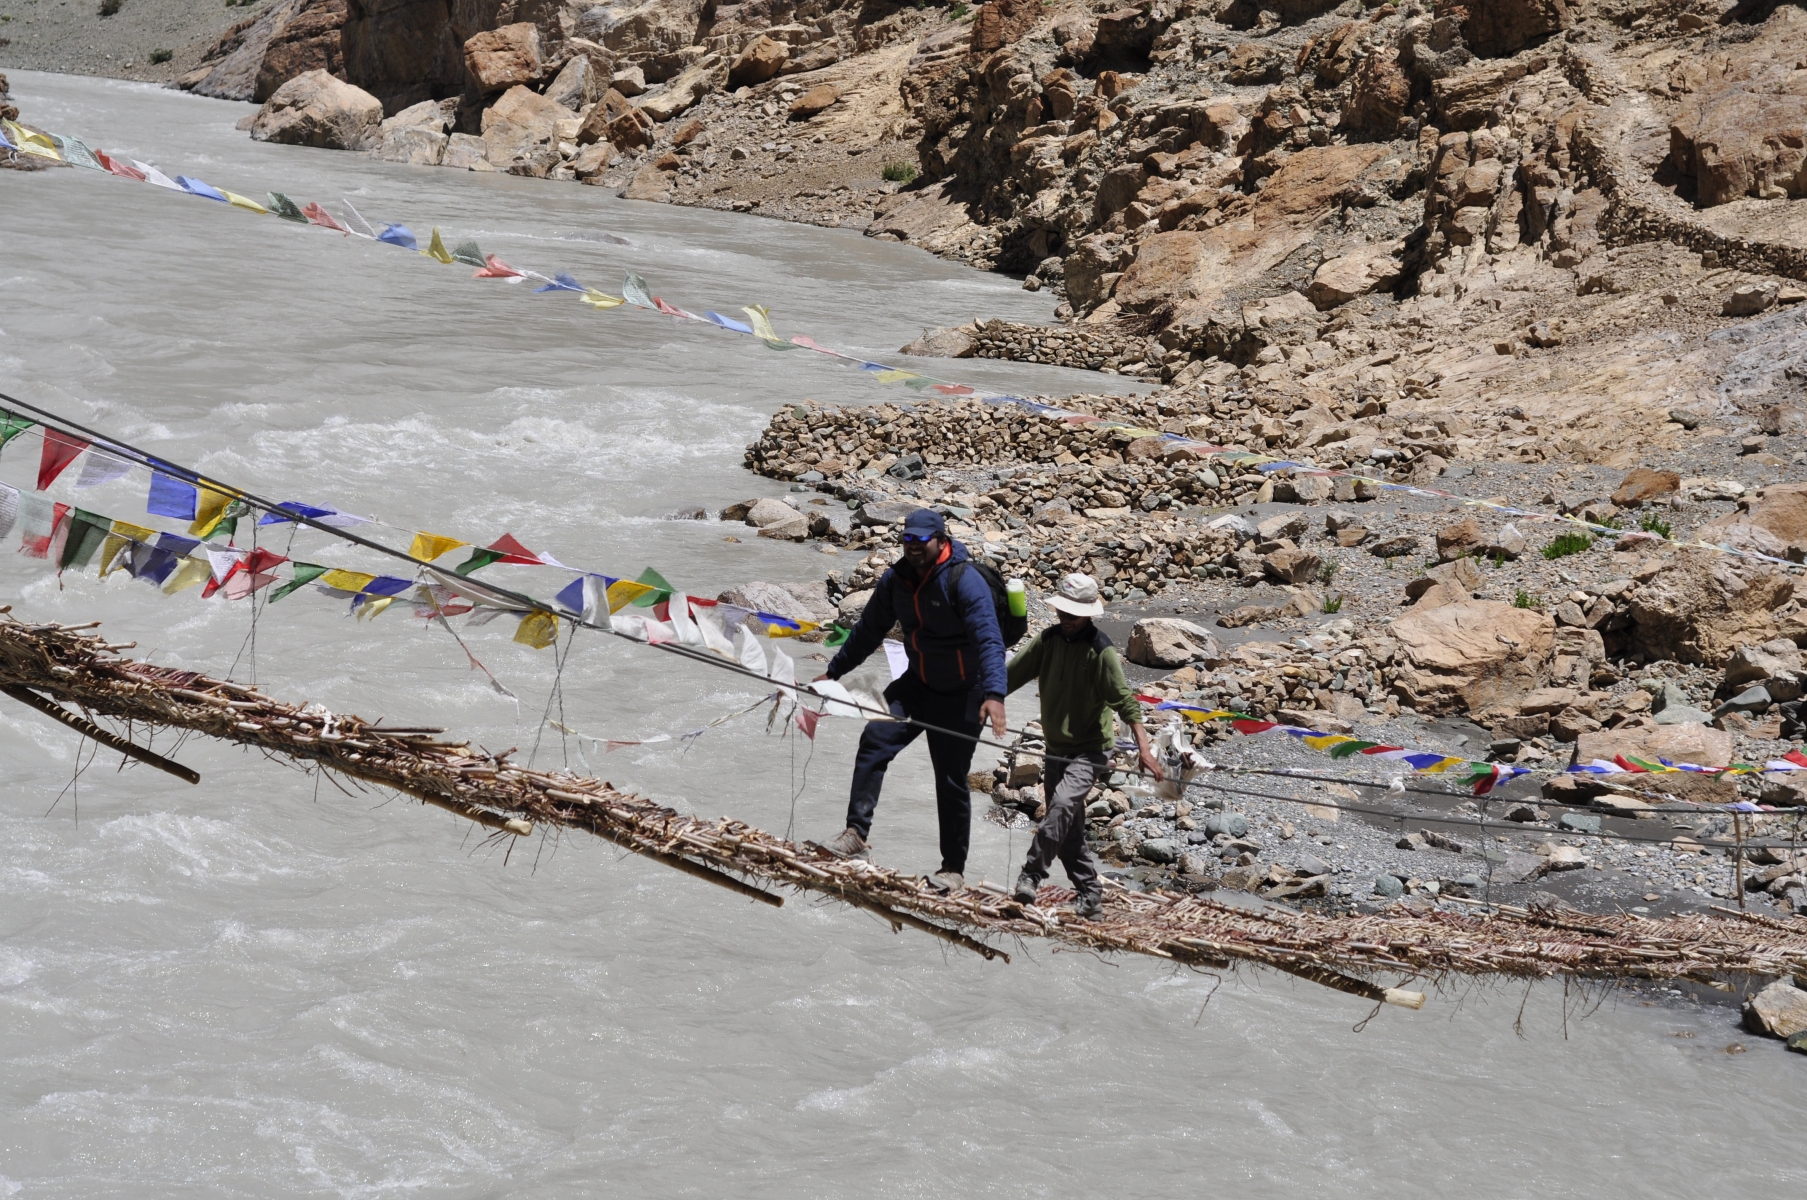 The Global Himalayan Expedition team crossing the bridge at 12000 ft over river Zanskar in Ladakh. On their way to electrify the 2500 year old Phugtal Monastry. Image credit: Global Himalayan Expedition.